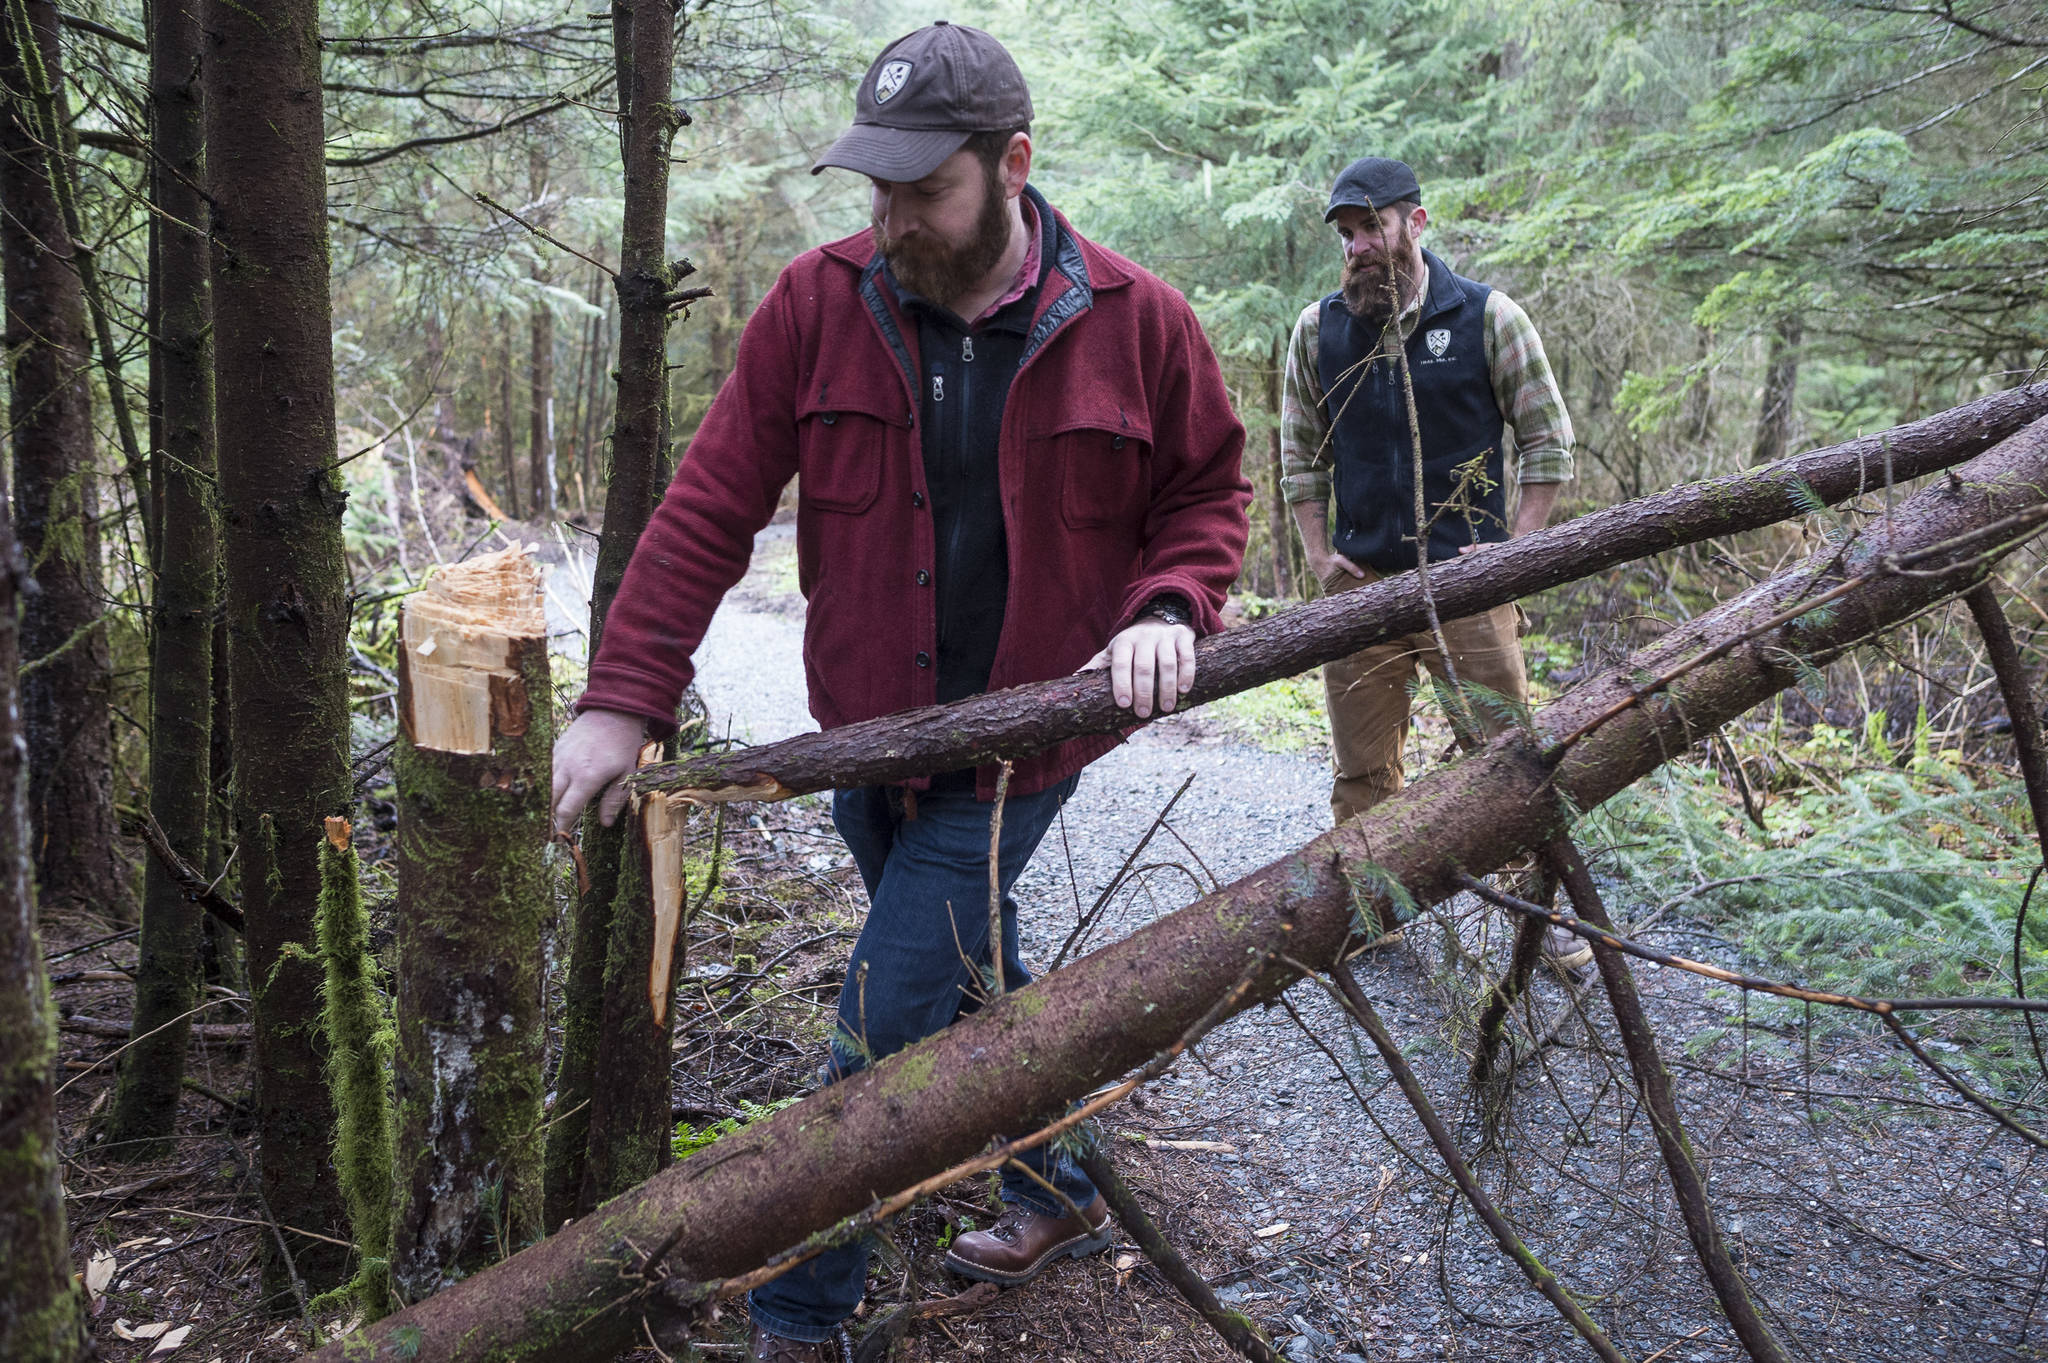 Erik Boraas, Executive Director of Trail Mix, Inc., left, and Ryan O’Shaughnessy come along vandalism along the newly reworked Switzer-Marriot Aquatic Education Trail in Switzer Creek on Monday, Nov. 12, 2018. Trail Mix’s annual fundraising dinner and auction is November 17 at Centennial Hall. (Michael Penn | Juneau Empire)